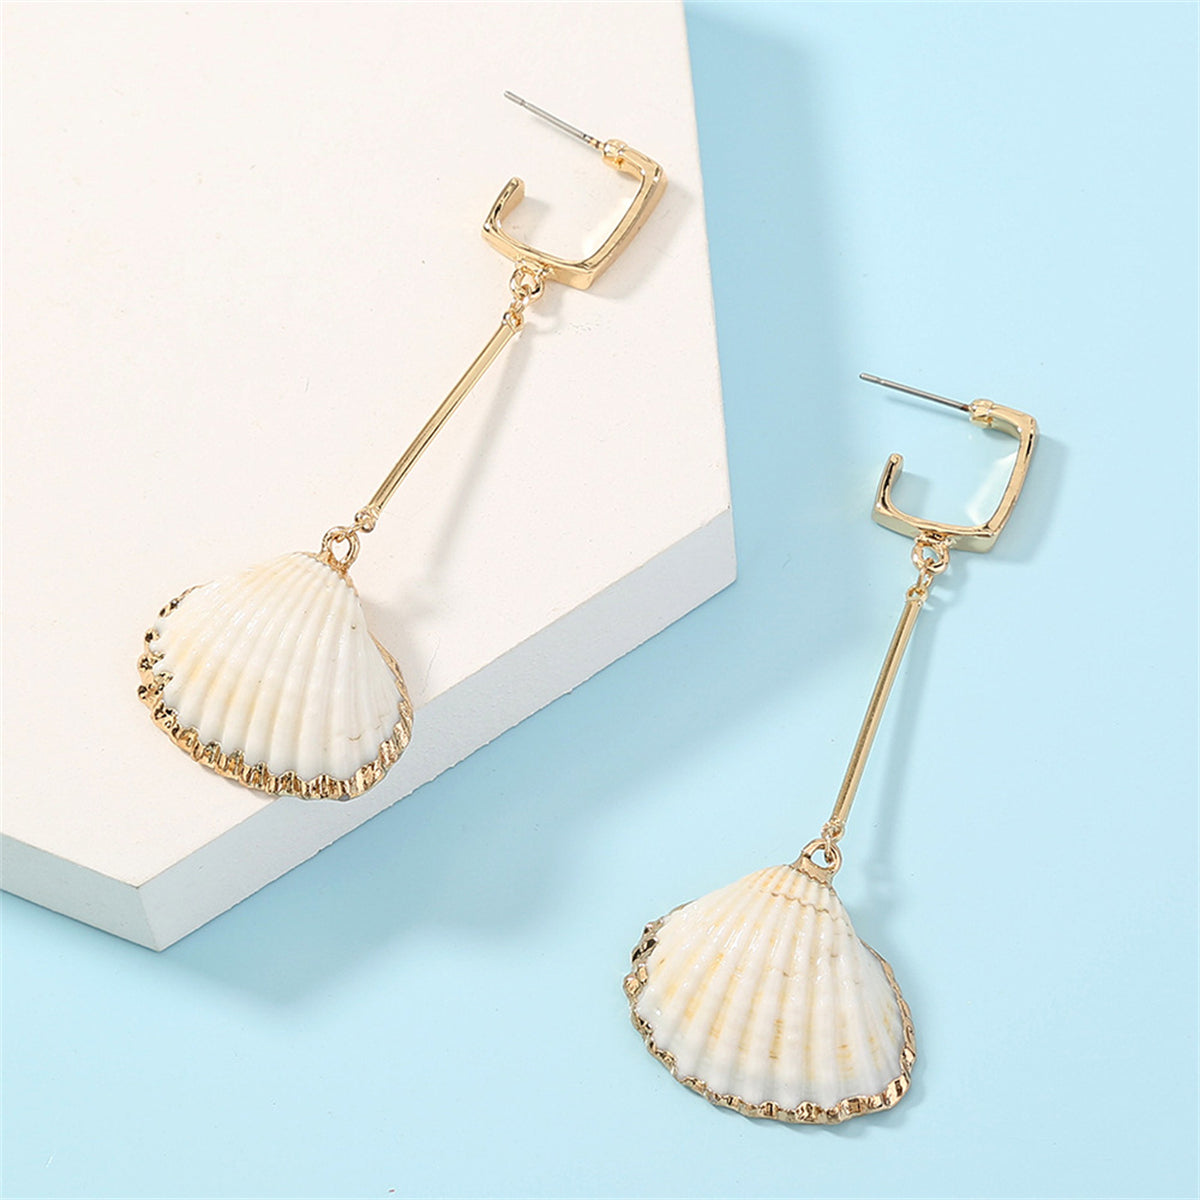 White Shell & 18K Gold-Plated Drop Earrings